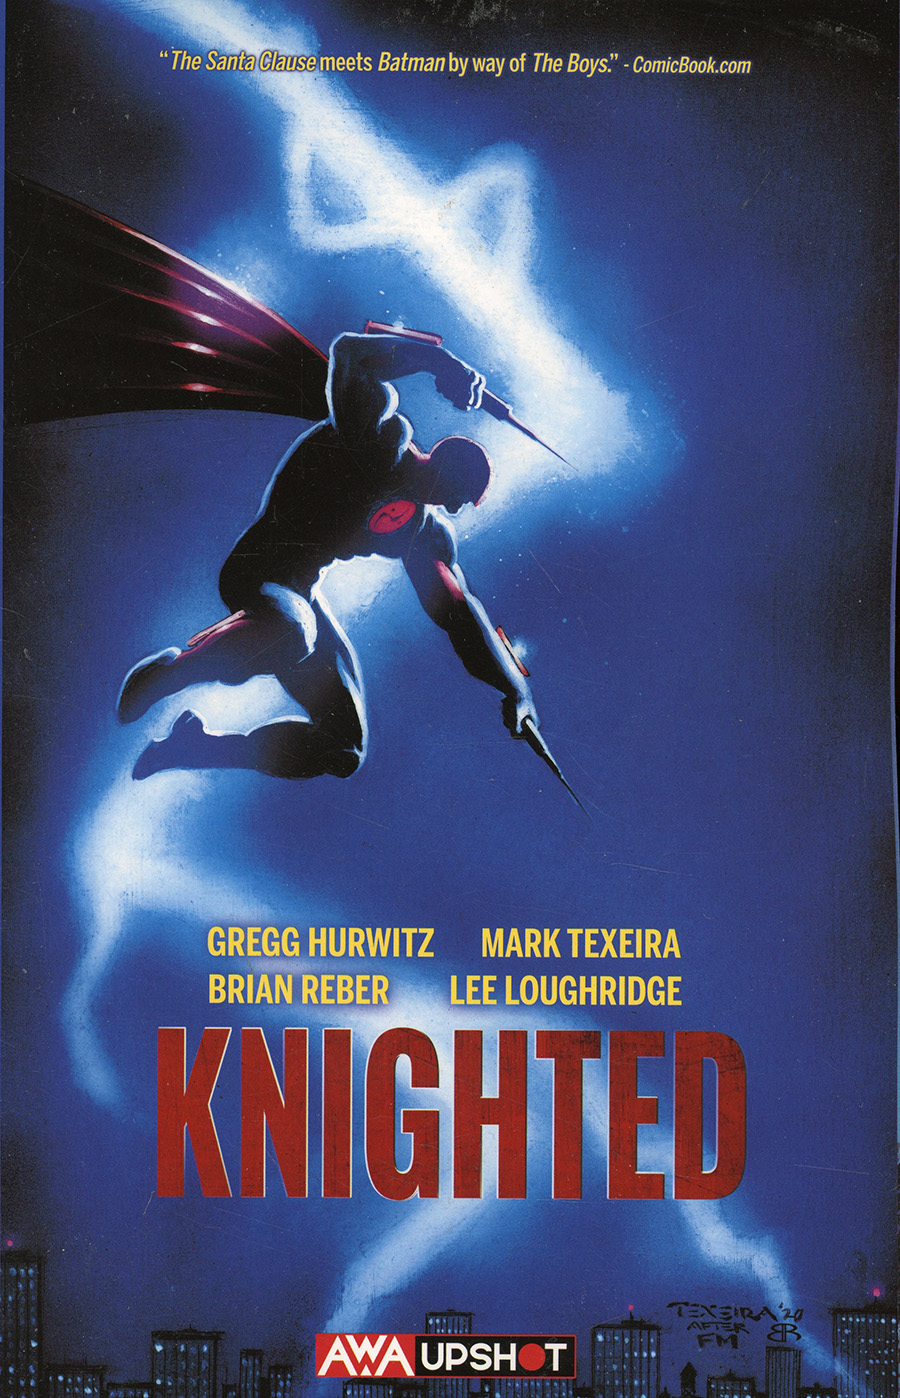 Knighted Vol 1 TP